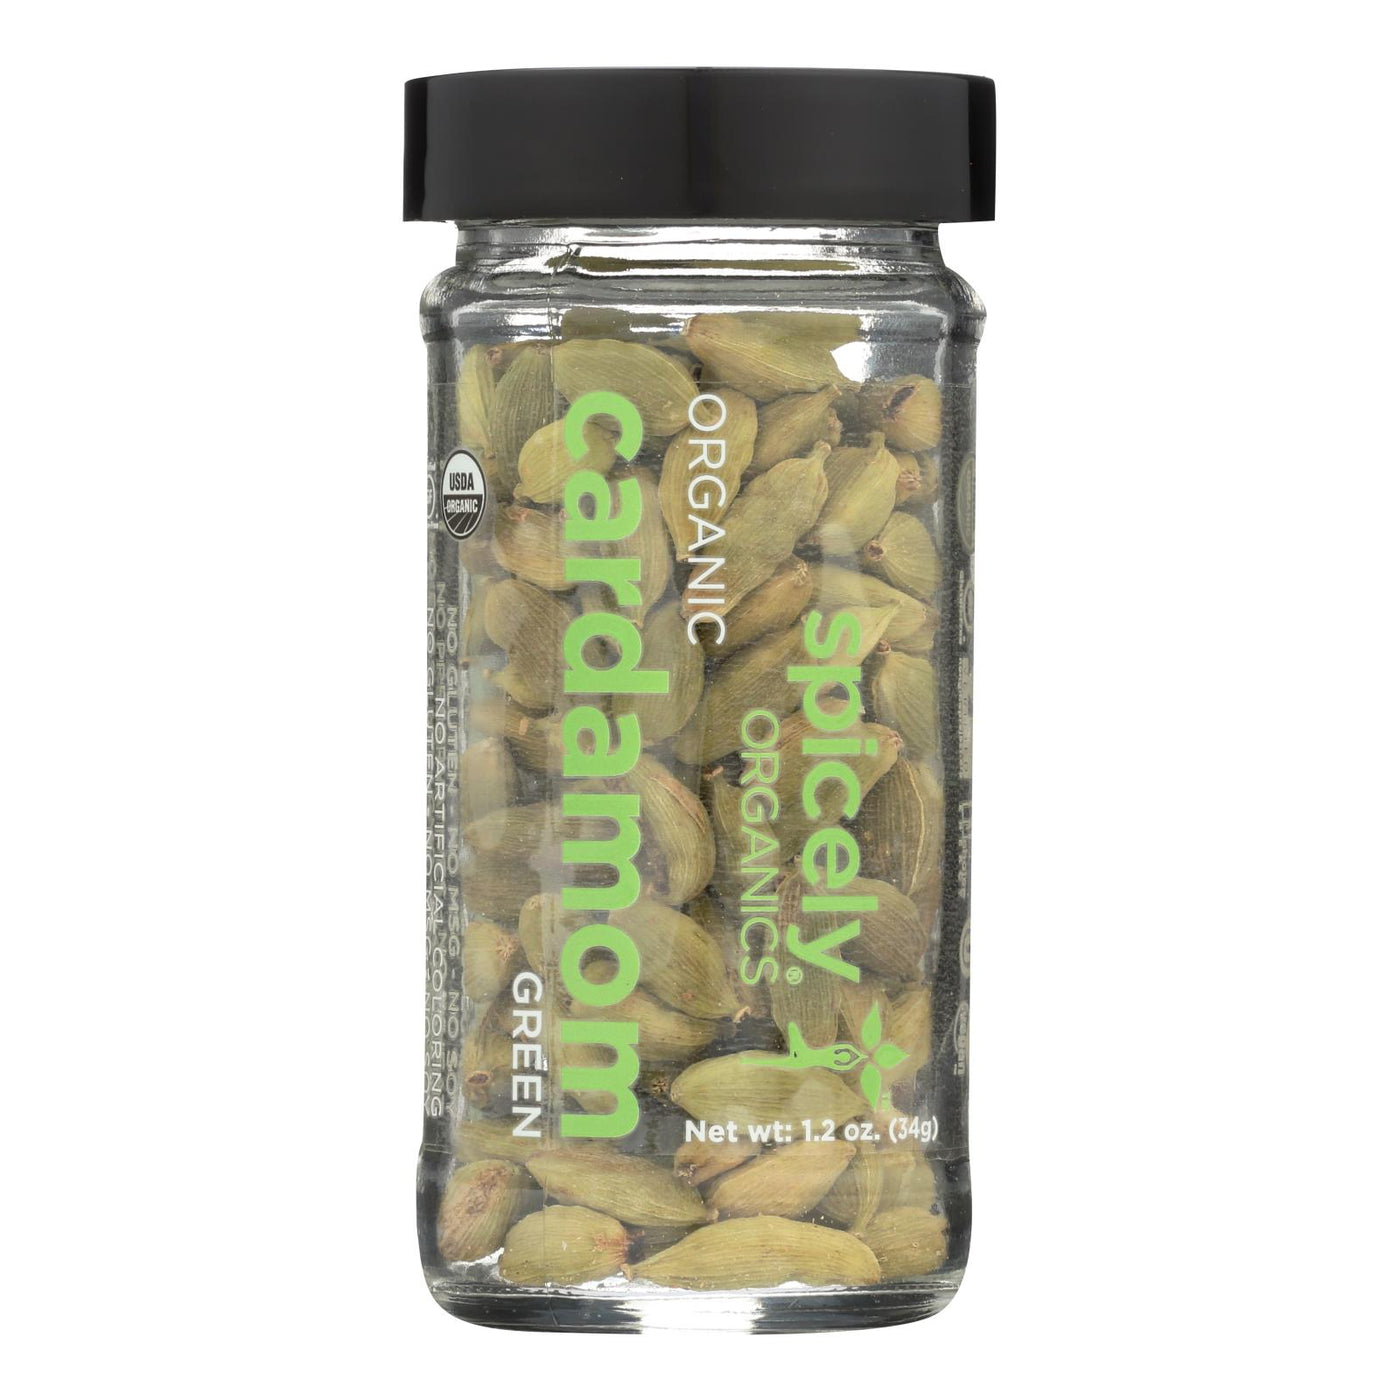 Spicely Organics - Organic Cardamom - Pods Green - Case Of 3 - 1.2 Oz. | OnlyNaturals.us